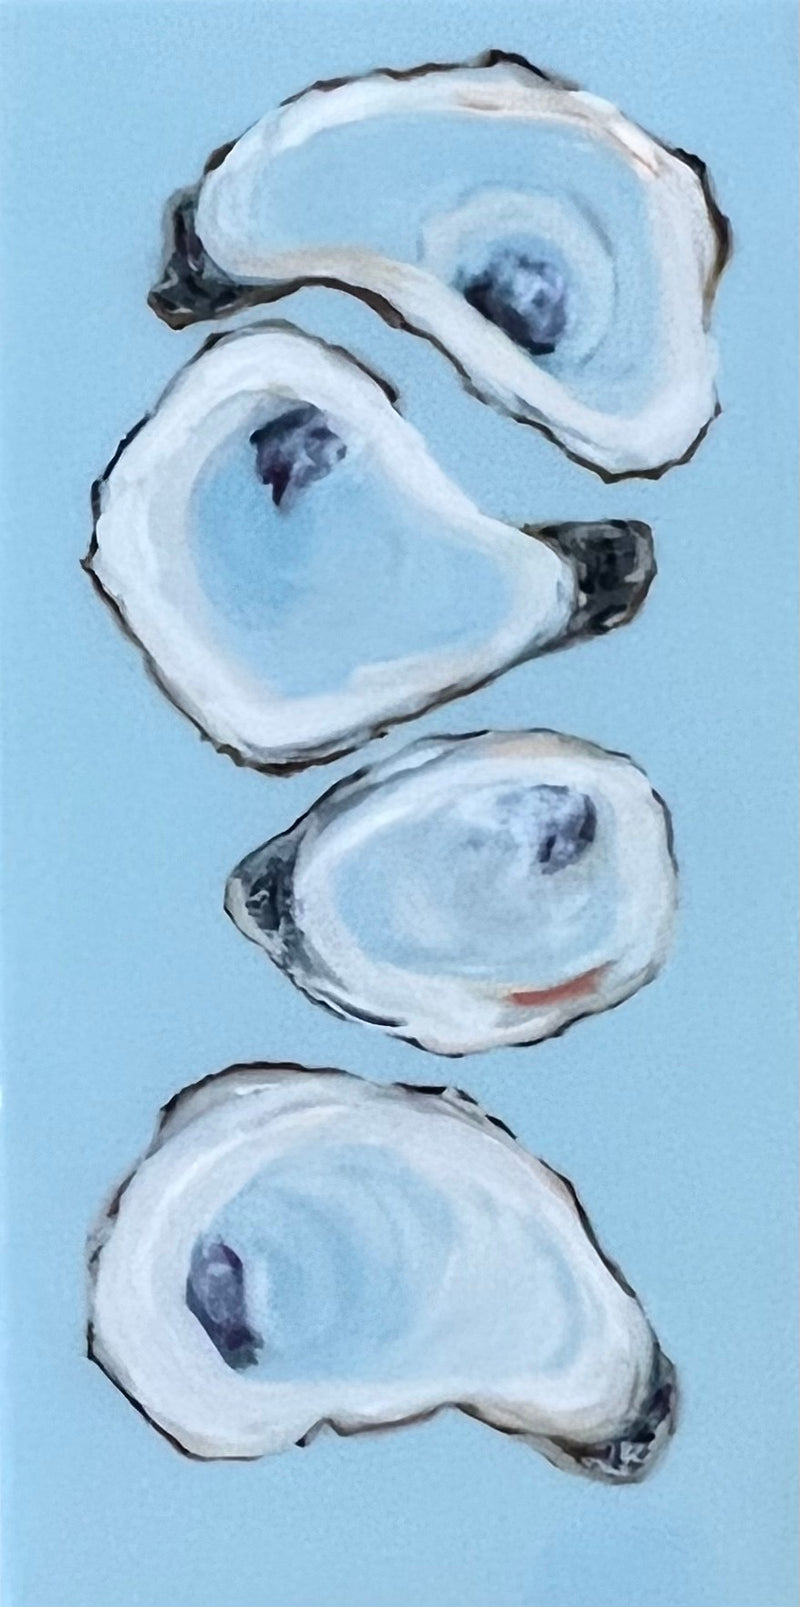 "4 Oysters VI"